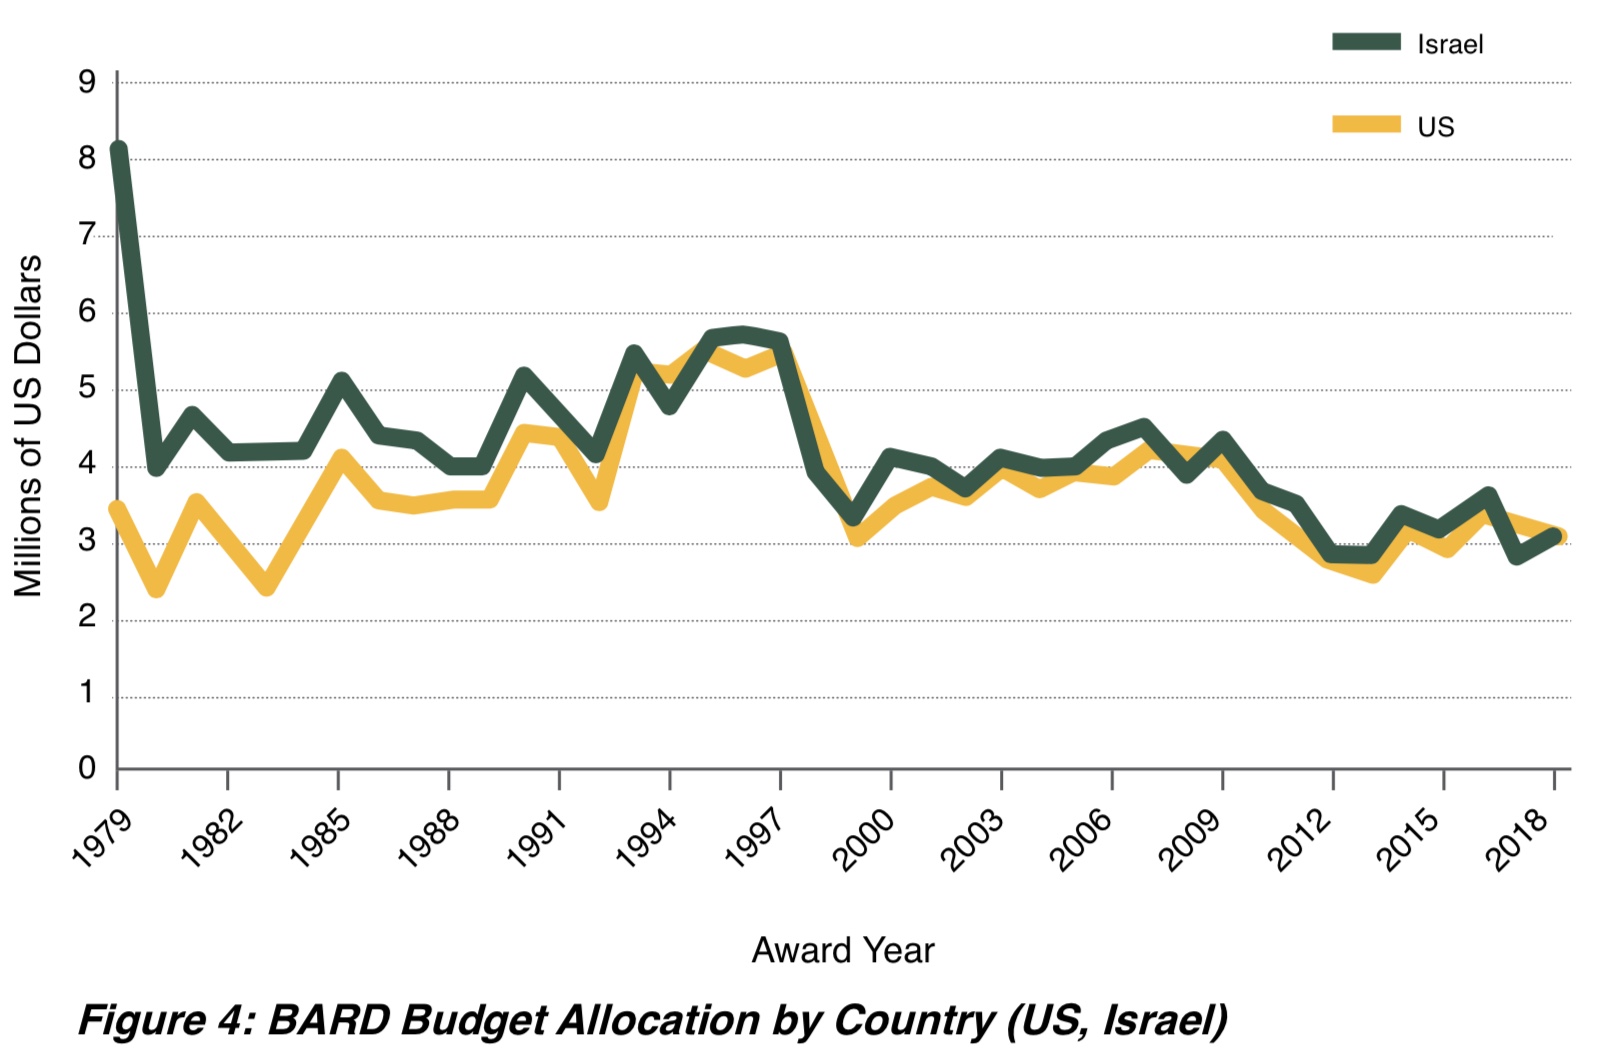 Figure 4: BARD Budget Allocation by Country (US, Israel)